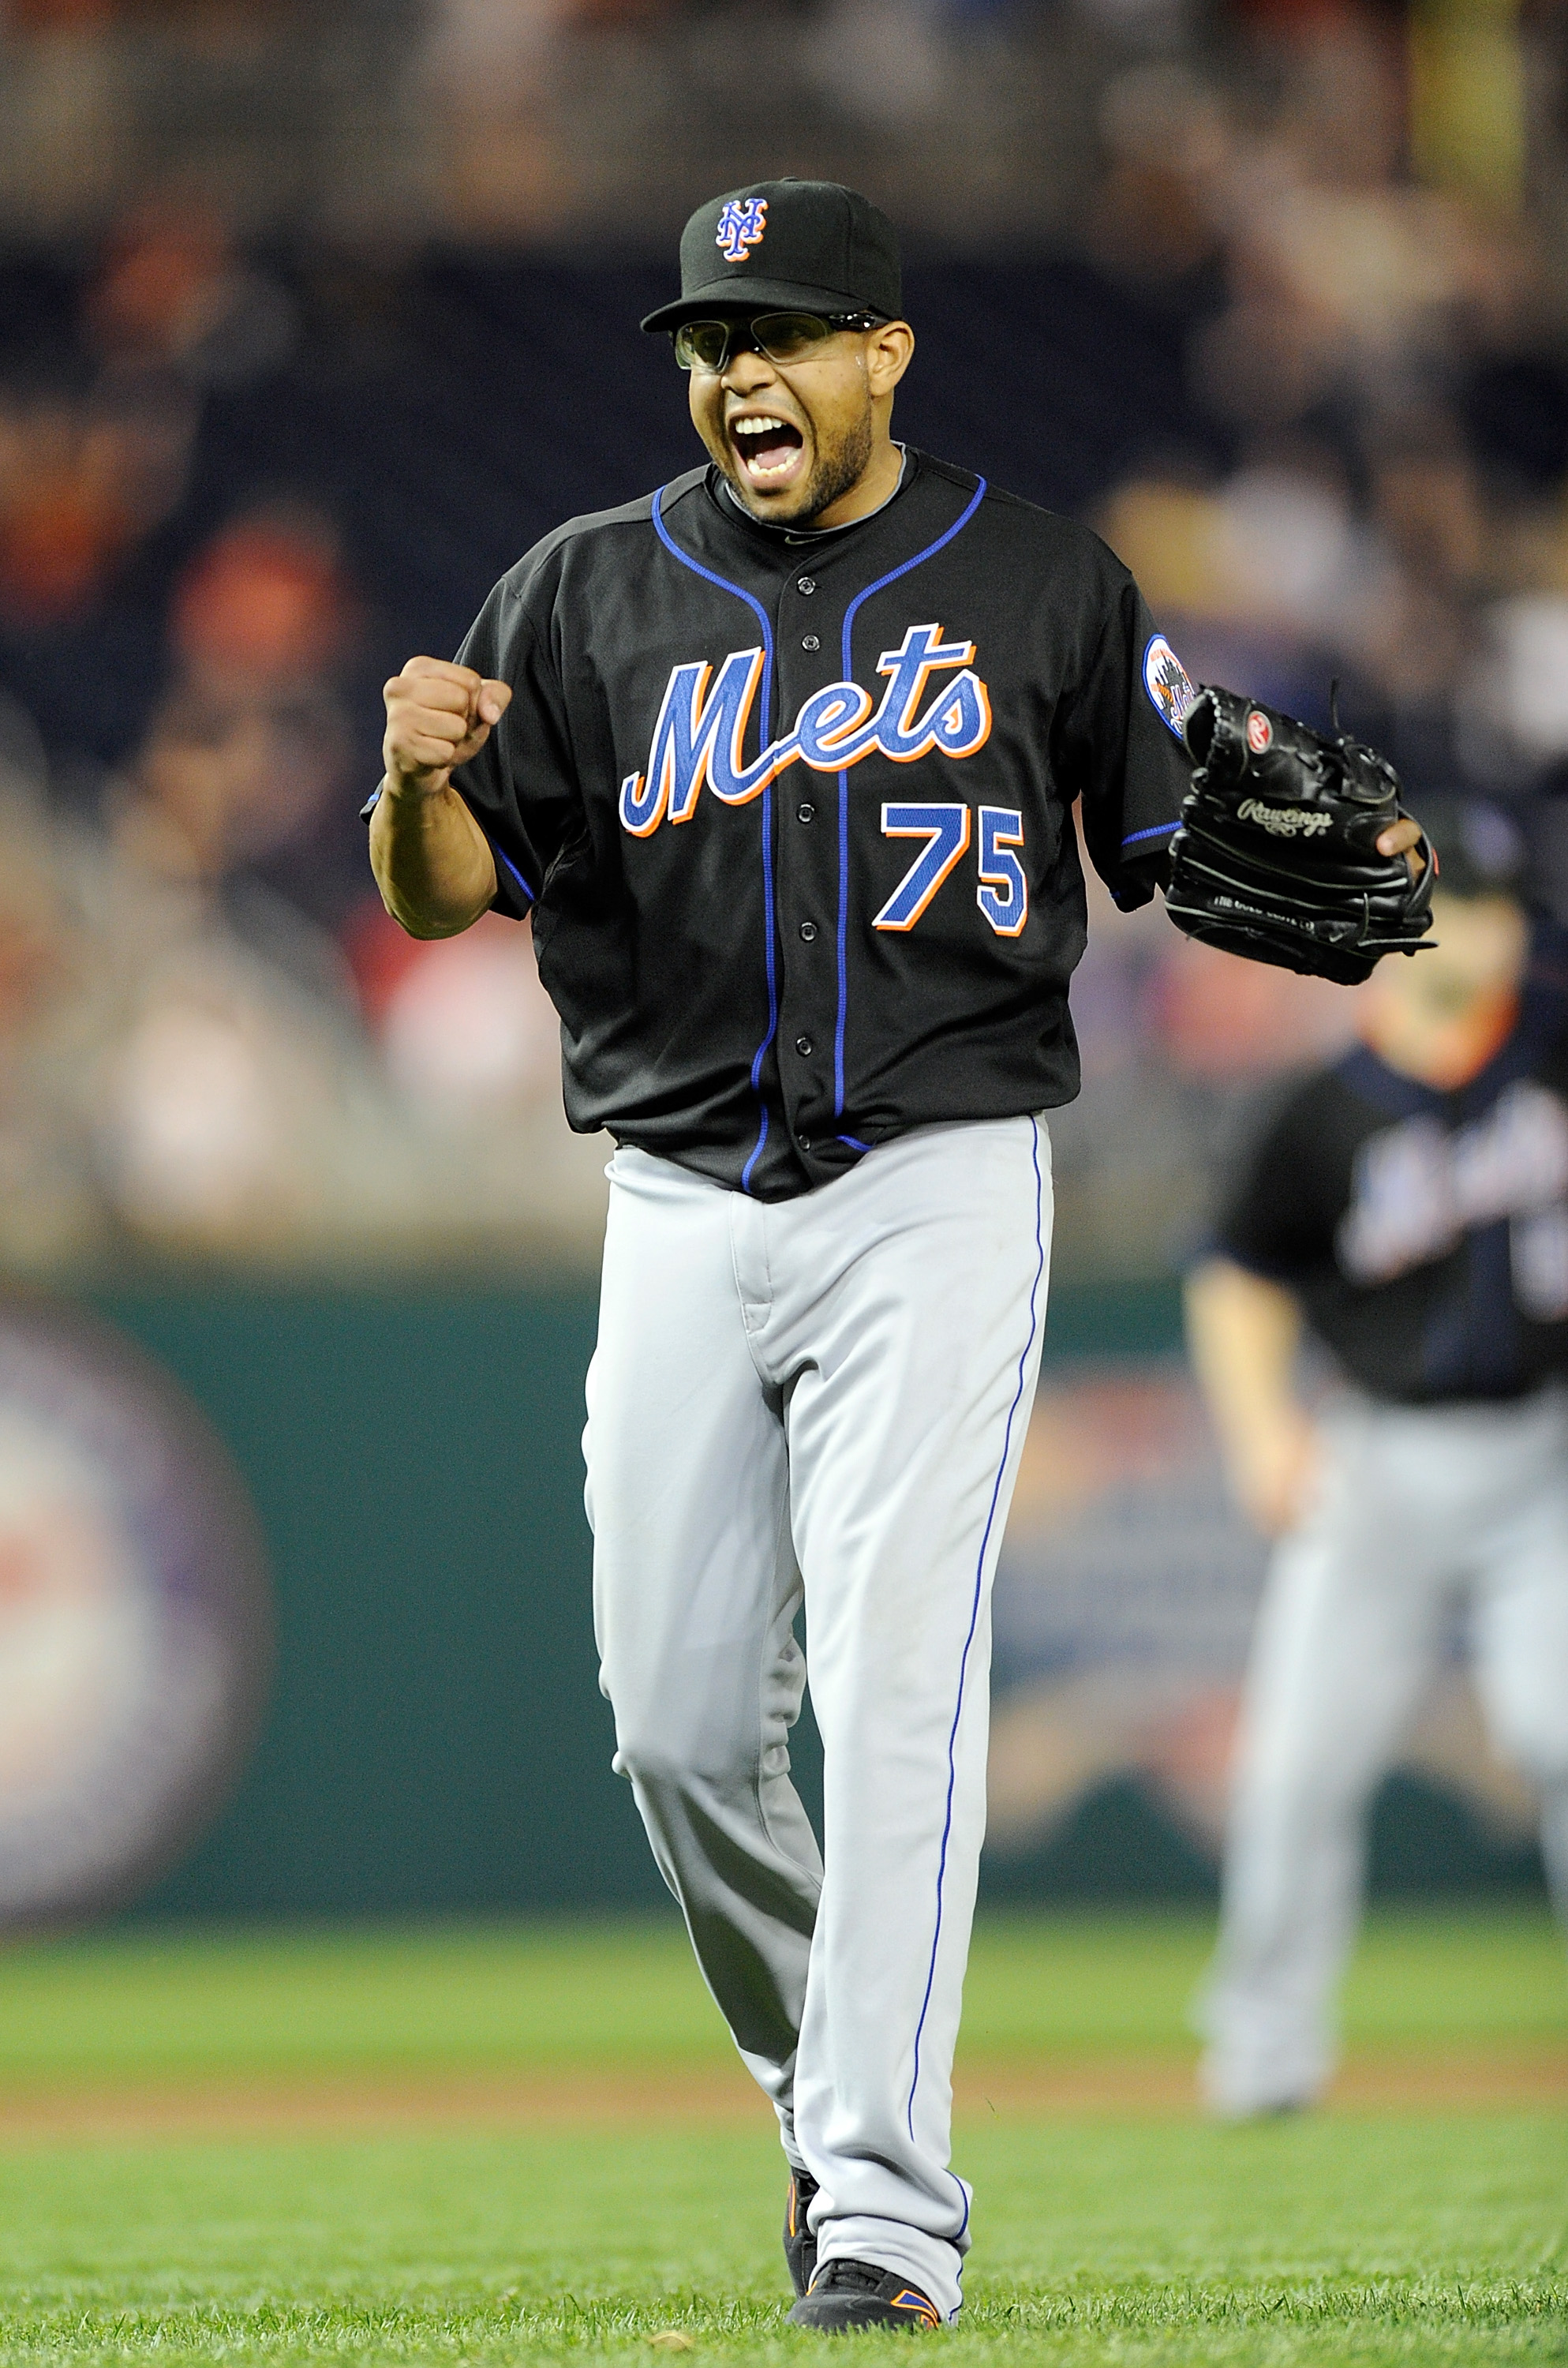 WASHINGTON, DC - APRIL 26:  Francisco Rodriguez #75 of the New York Mets celebrates after a 6-4 victory against the Washington Nationals at Nationals Park on April 26, 2011 in Washington, DC.   (Photo by Greg Fiume/Getty Images)